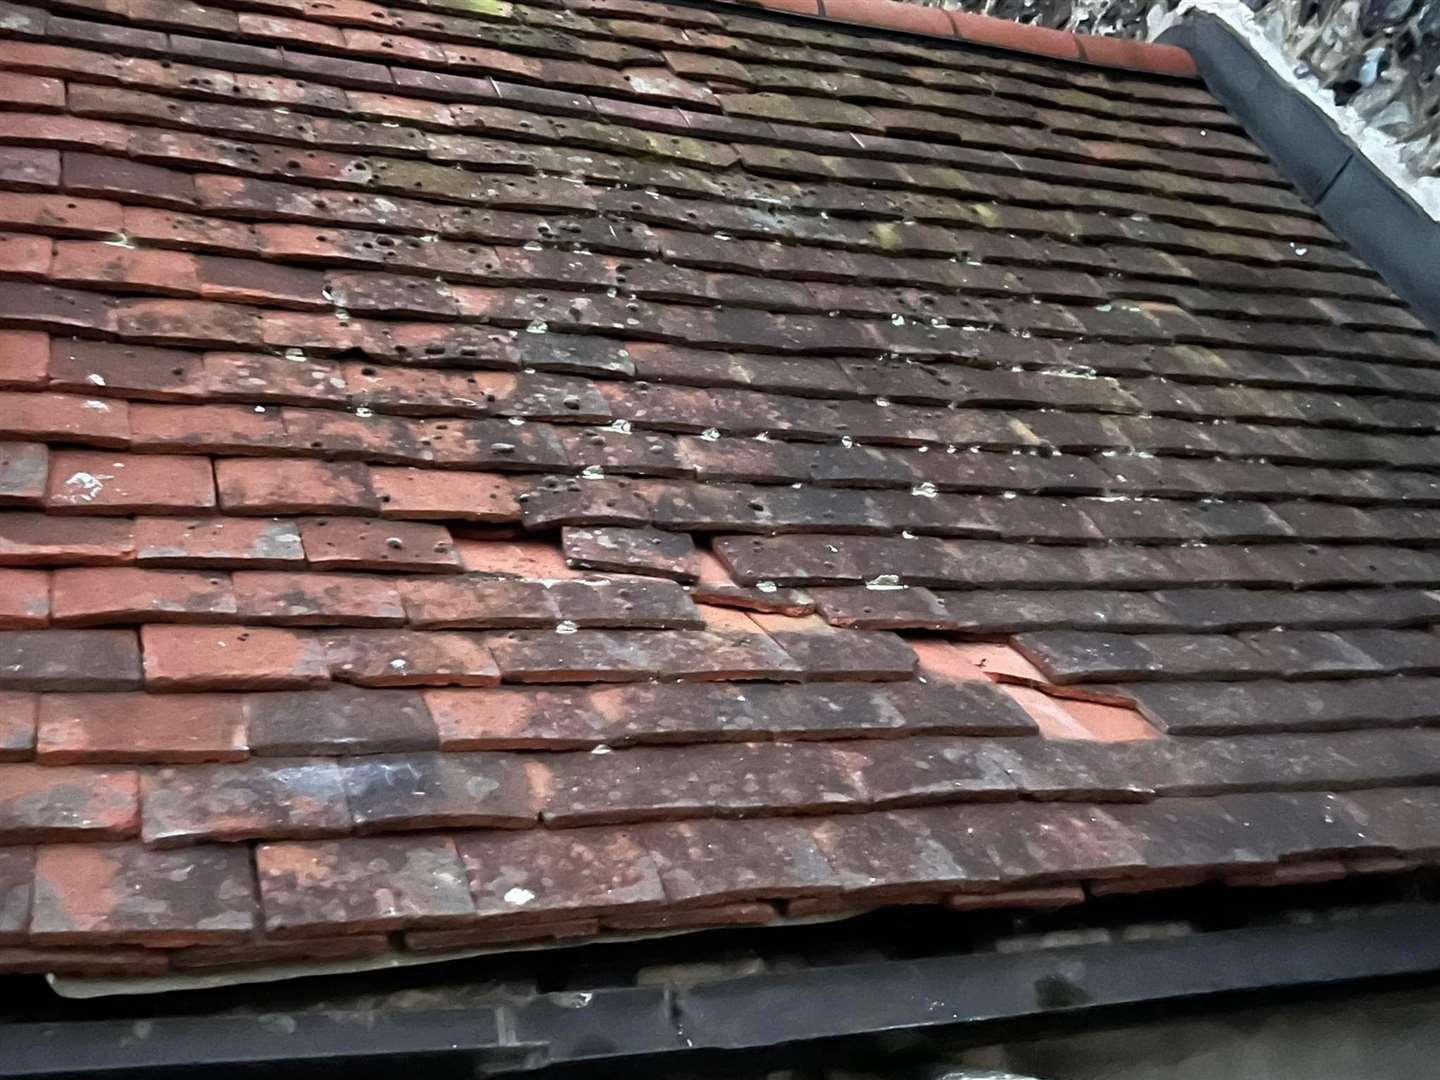 Some of the damage to the roof at the Cliffe church